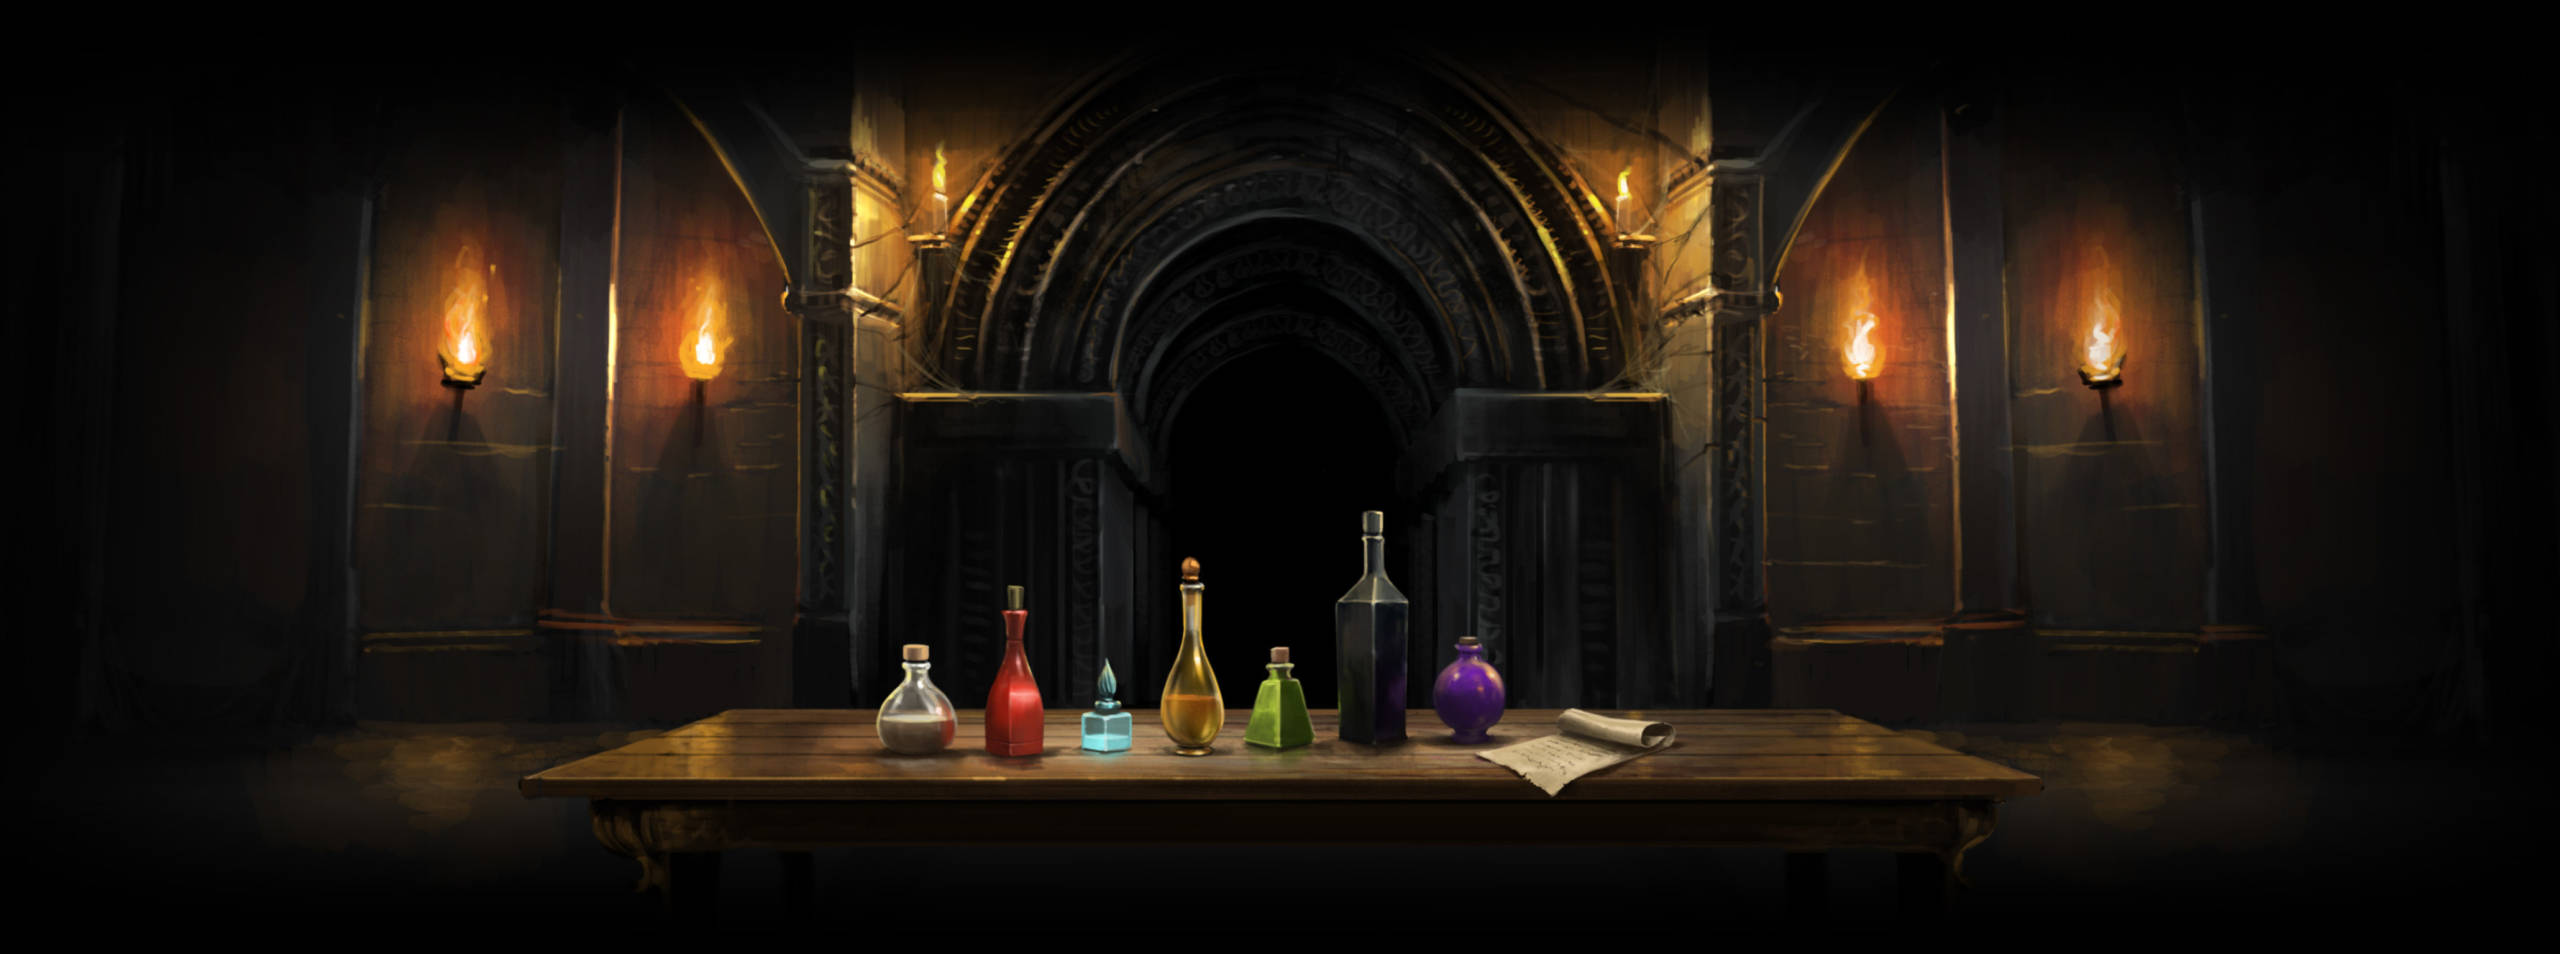 The seven potions testing logic that protect the Philosopher's Stone.